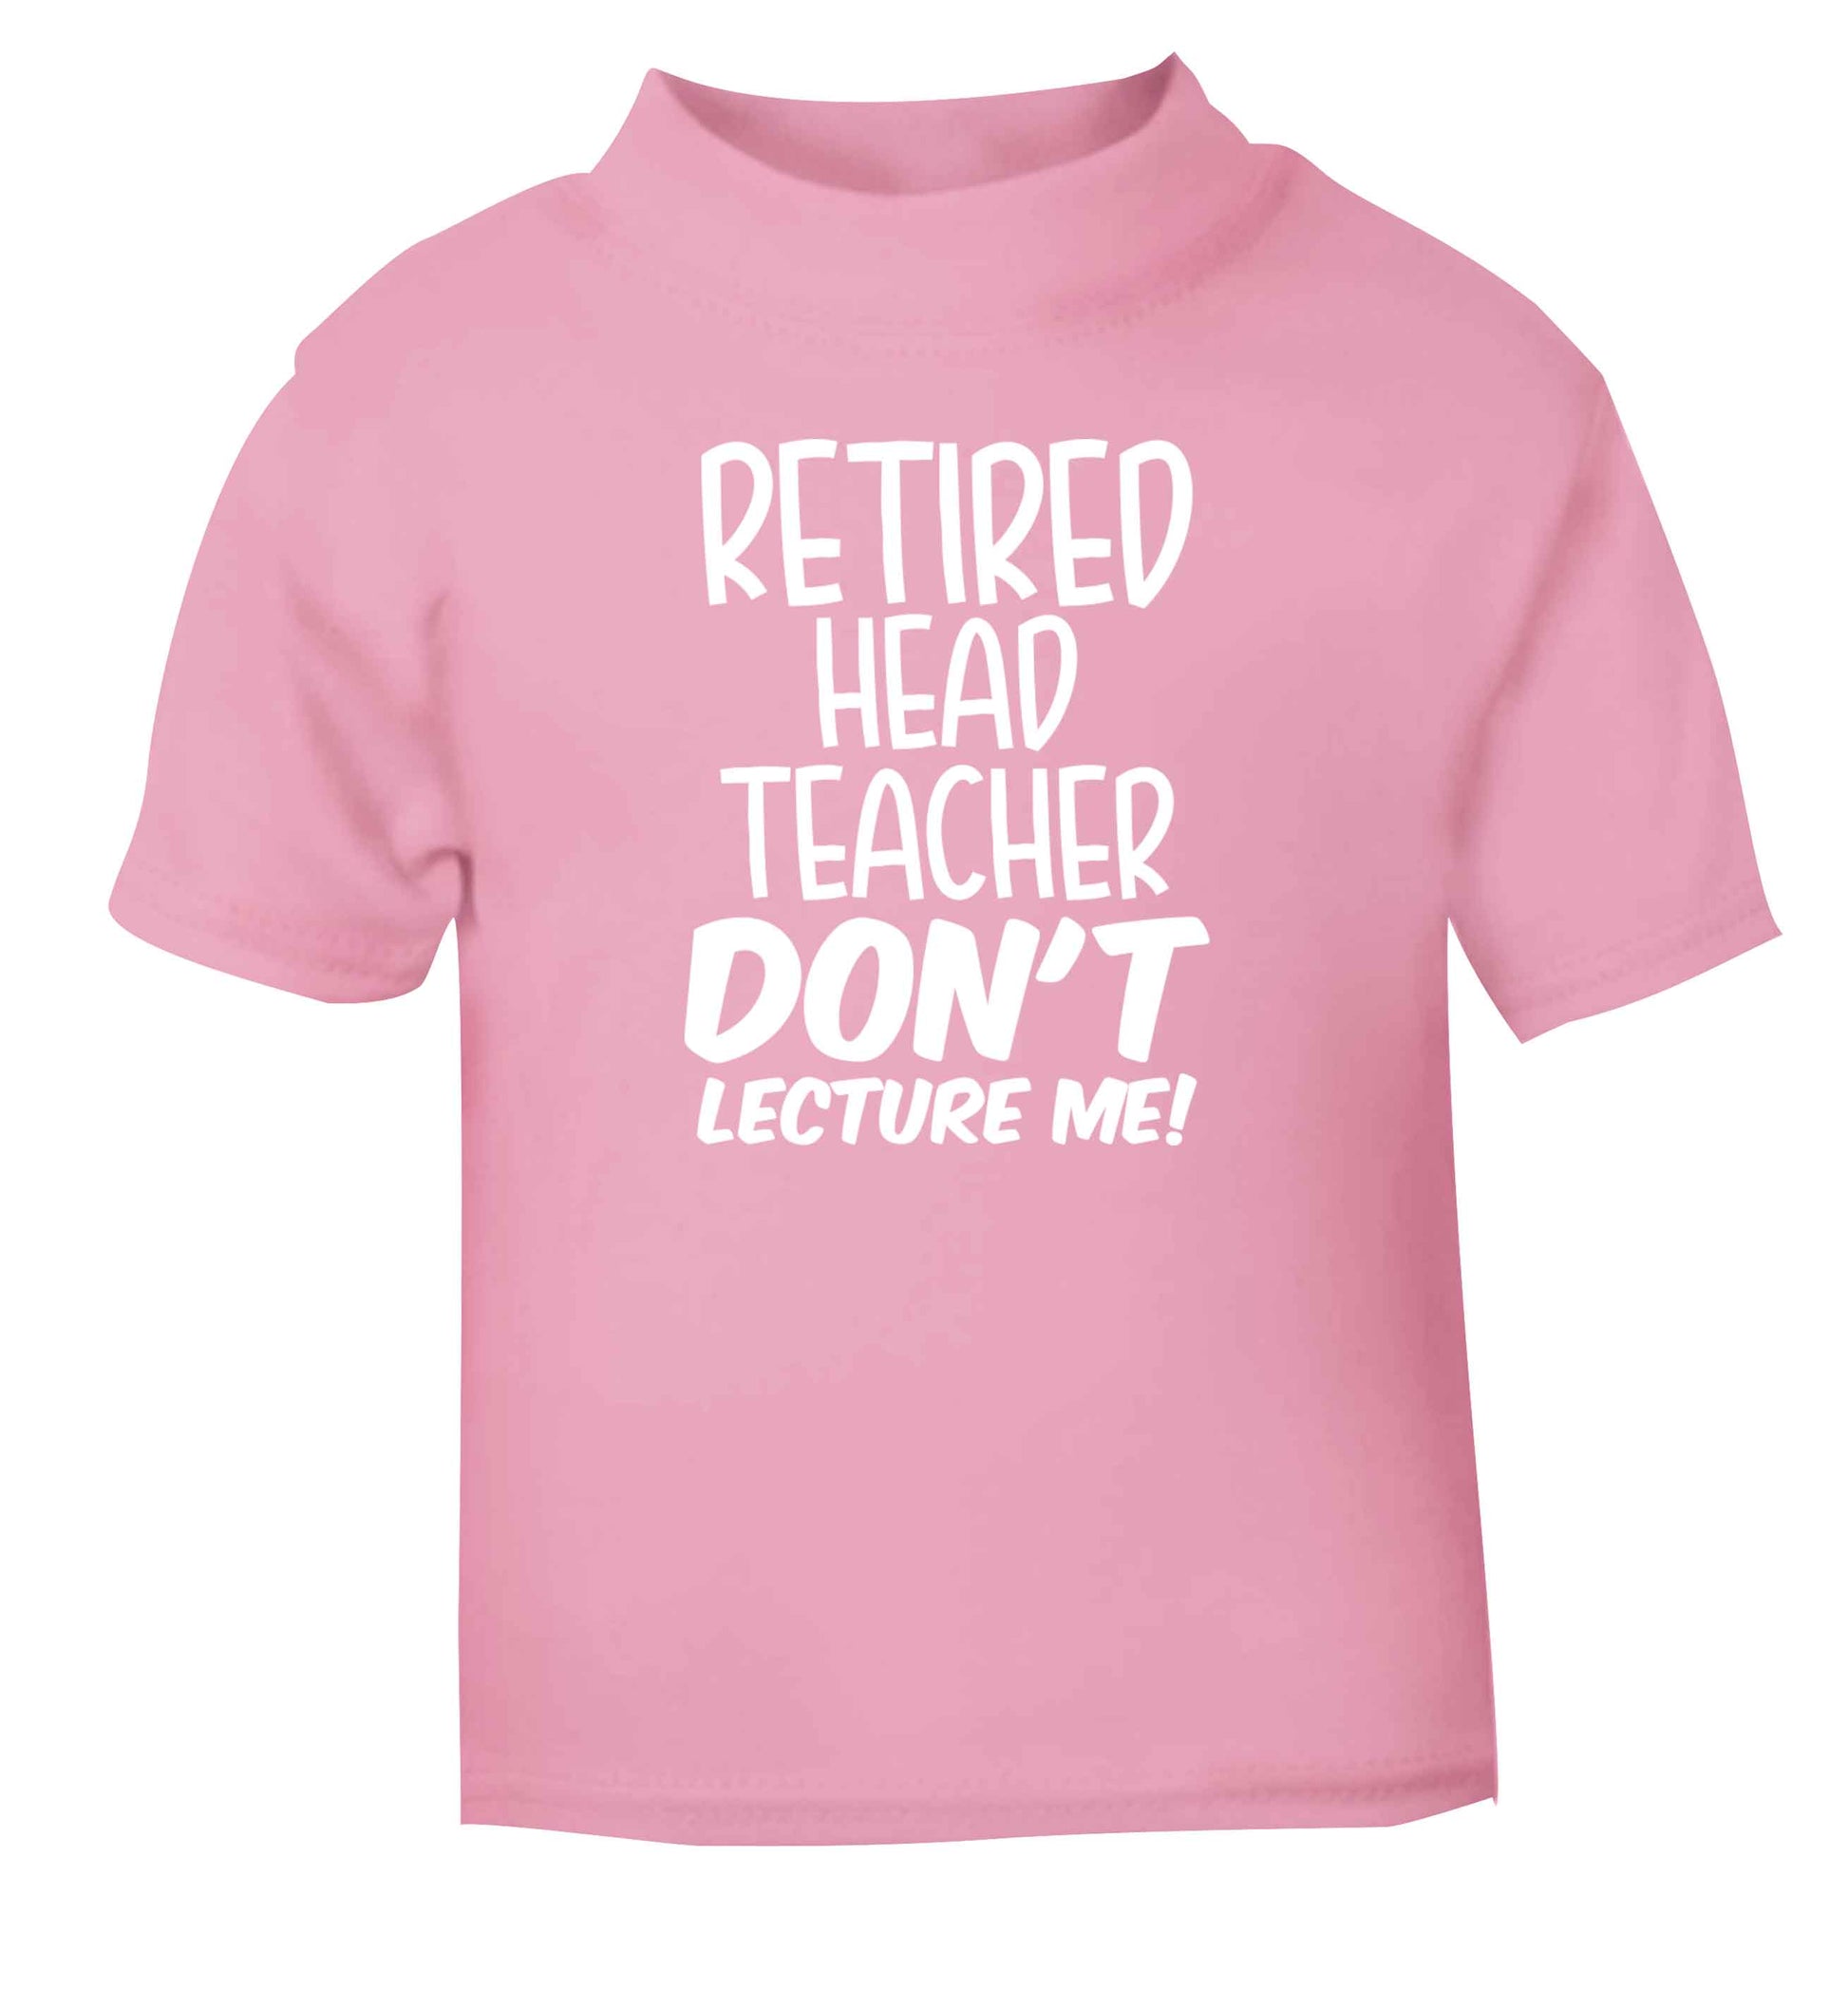 Retired head teacher don't lecture me! light pink Baby Toddler Tshirt 2 Years